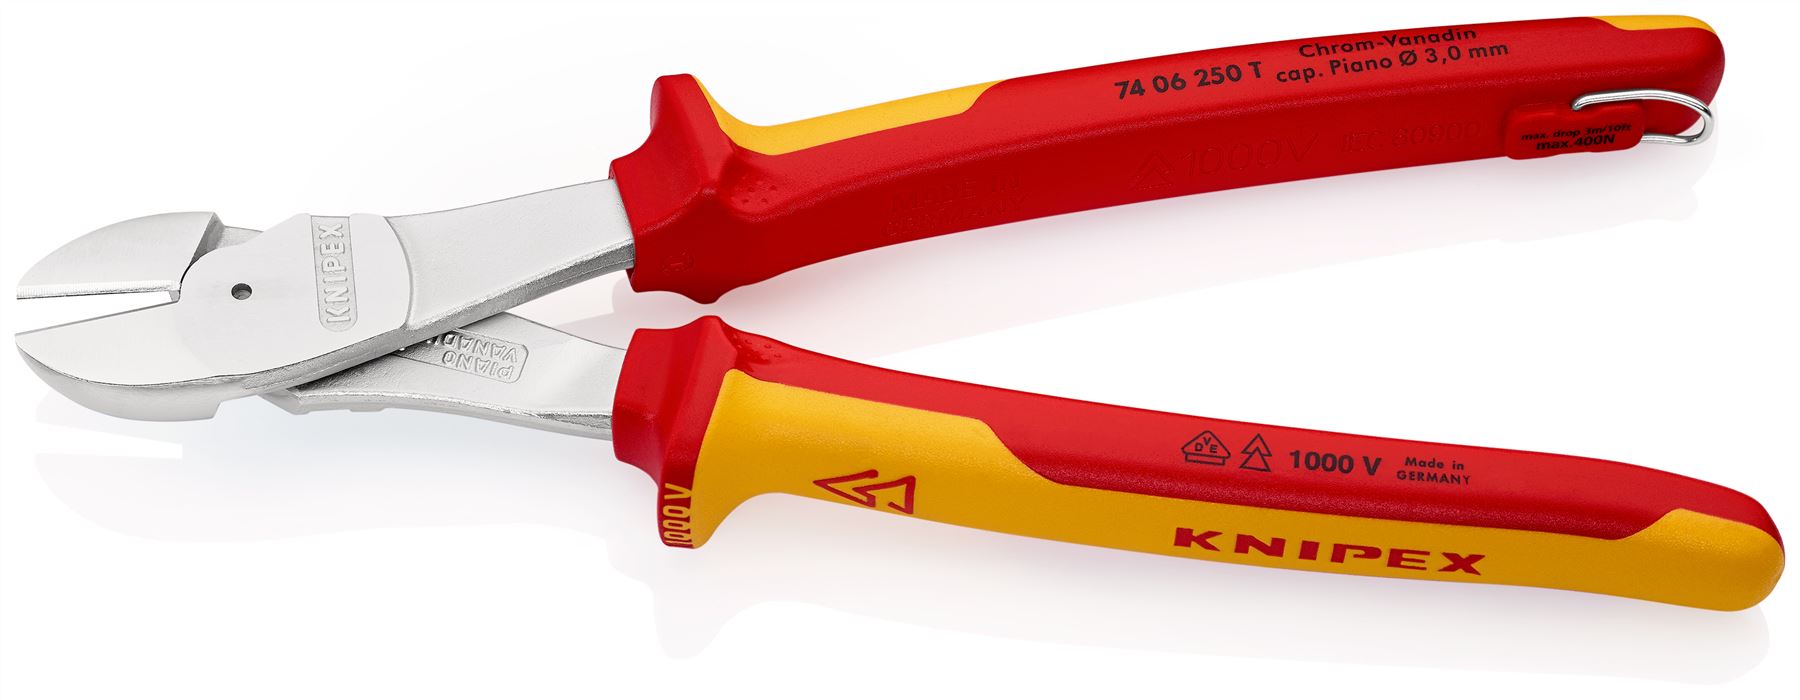 Knipex High Leverage Diagonal Cutter 250mm VDE Insulated 1000V with Tether Point 74 06 250 T